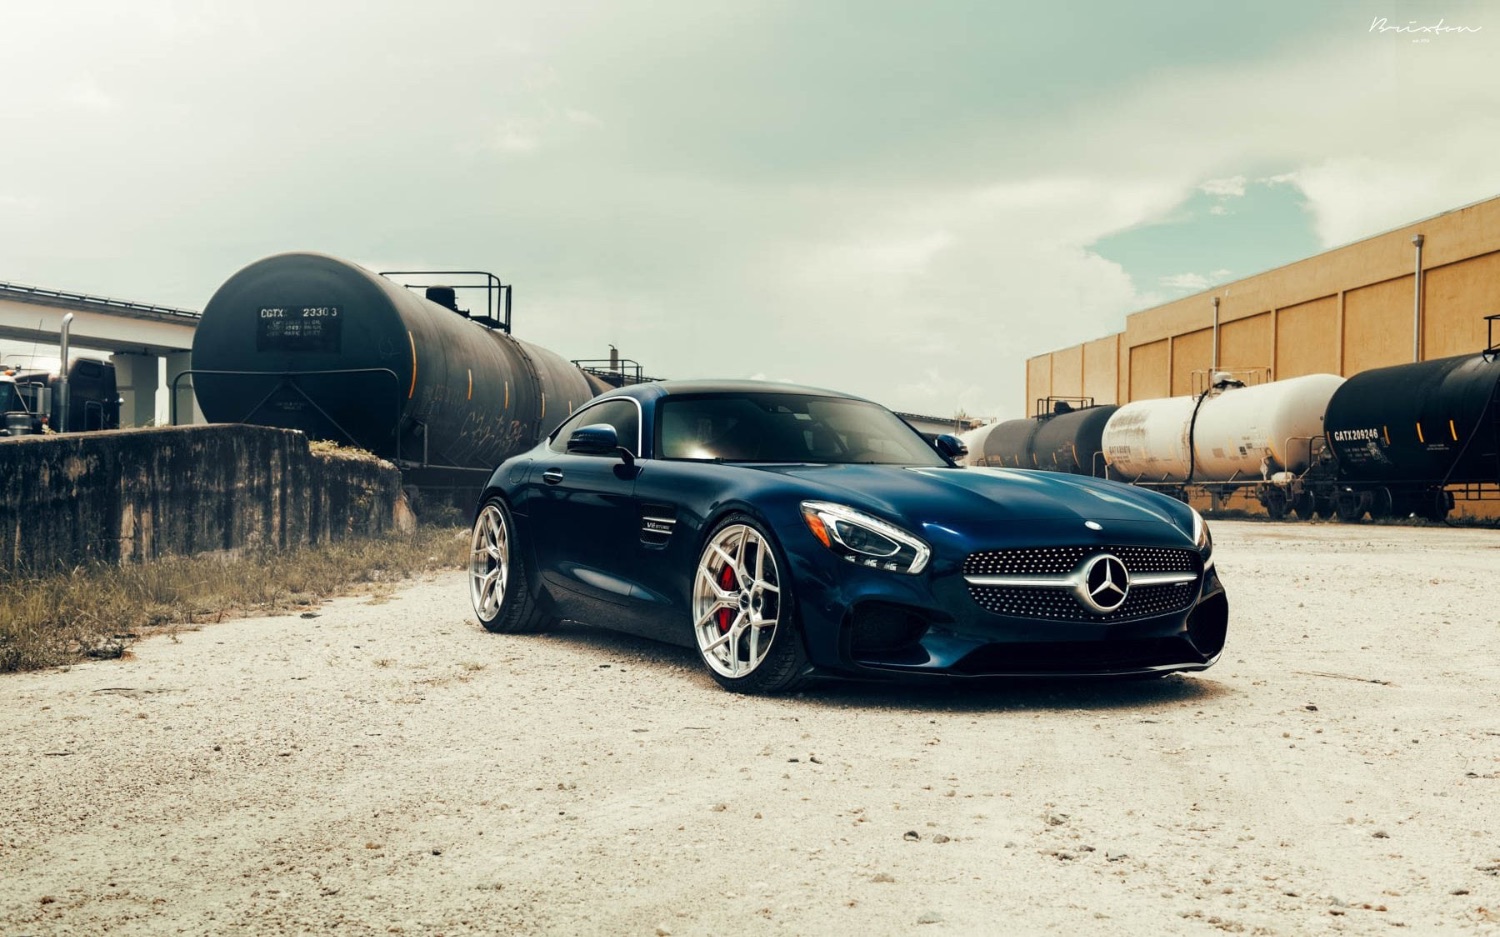 mercedes-amg-gts-blue-brixton-forged-pf7-duo-series-forged-wheels-20-21-brushed-concave-forged-wheels-5-1800x1125-1